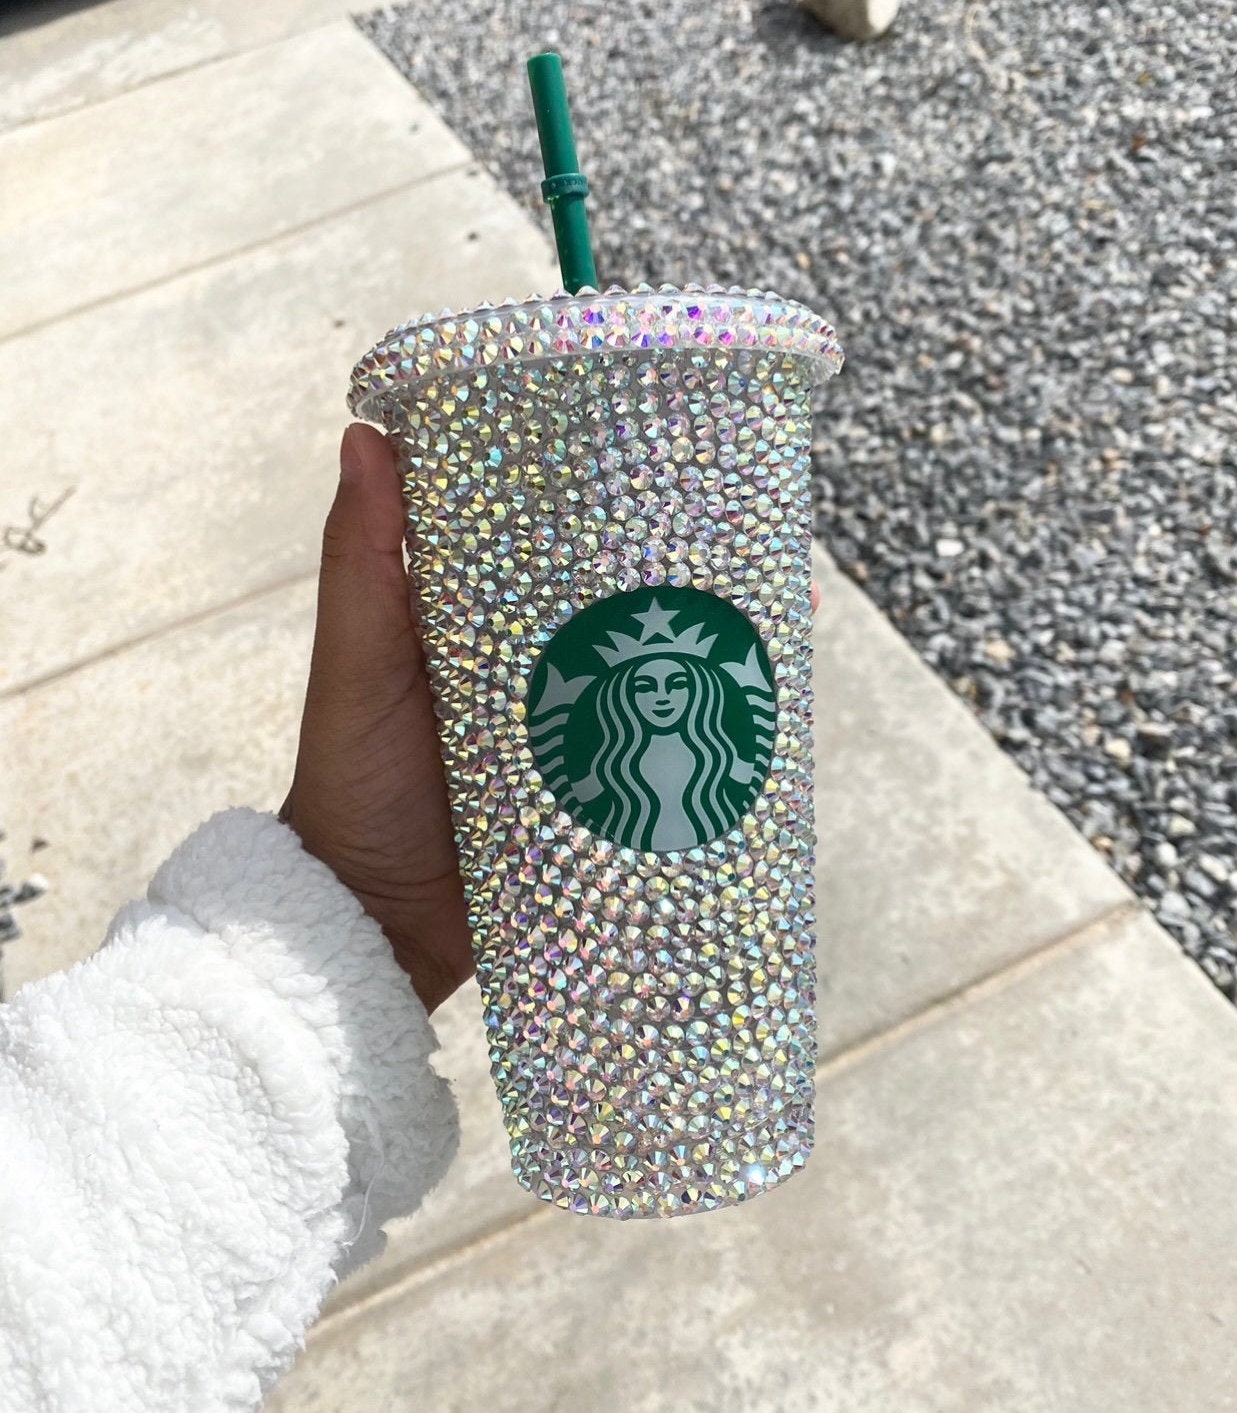 Louis Vuitton starbucks cups now available 🤩 Orders placed today will